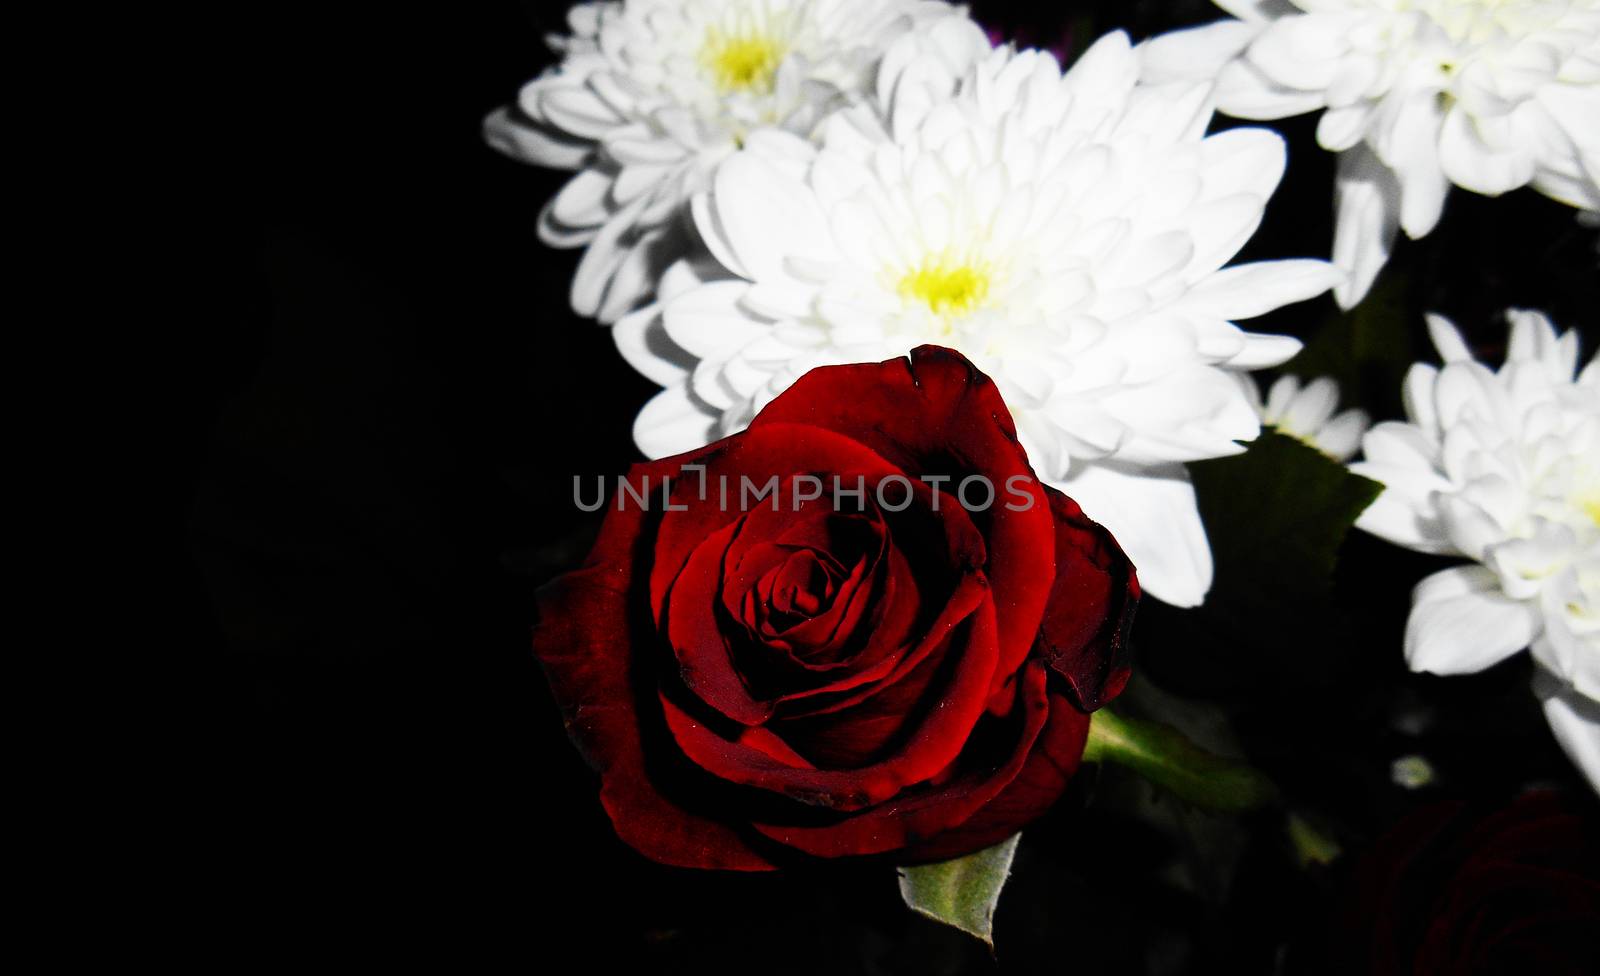 Close up view of a red rose and white flowers on a black background.

Picture taken on October 20, 2014.